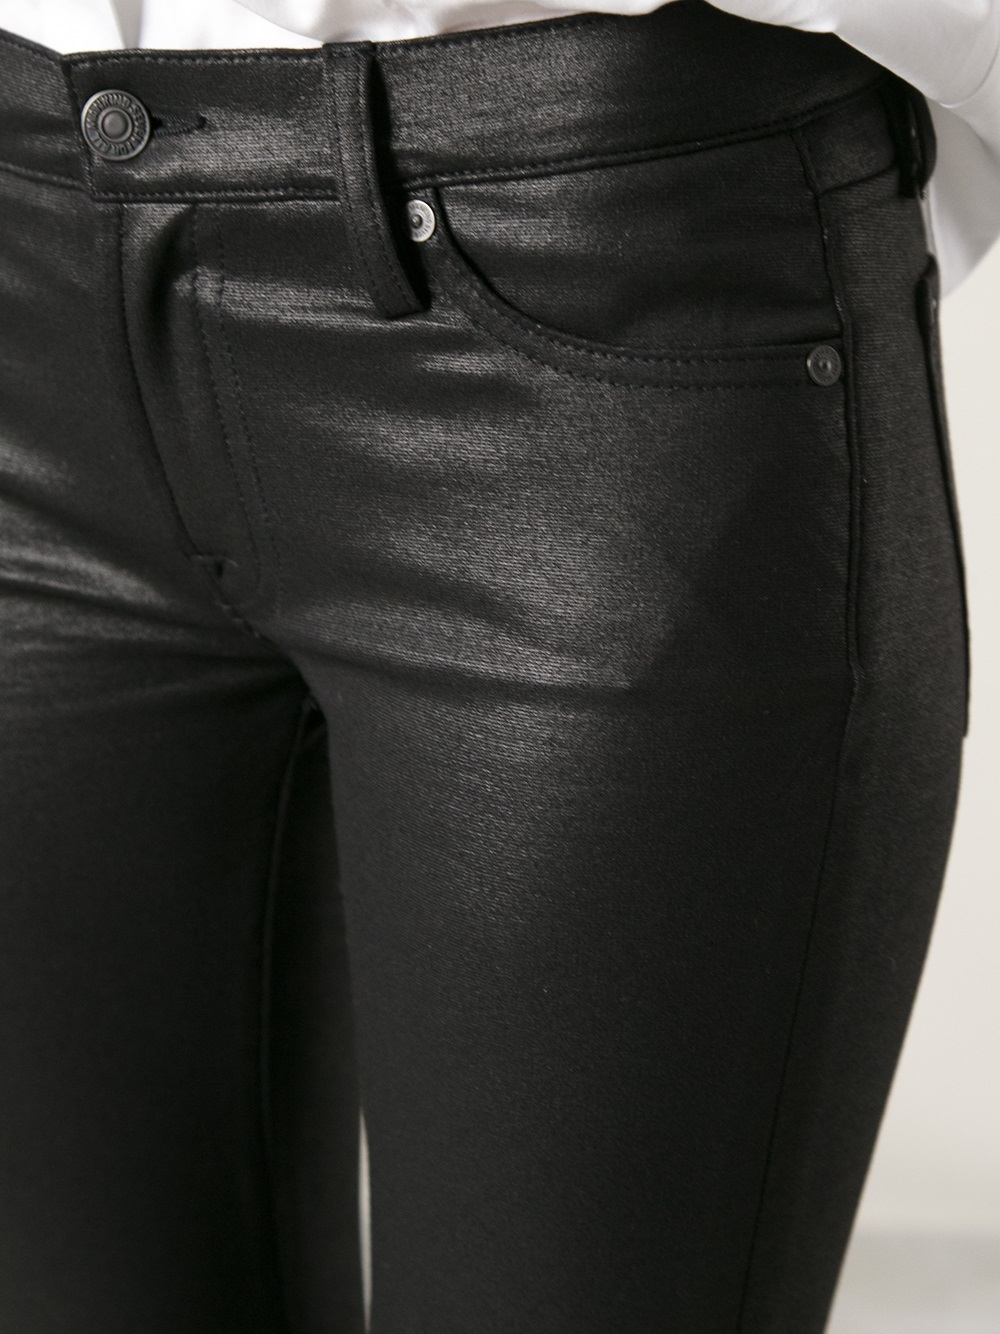 seven for all mankind black coated jeans